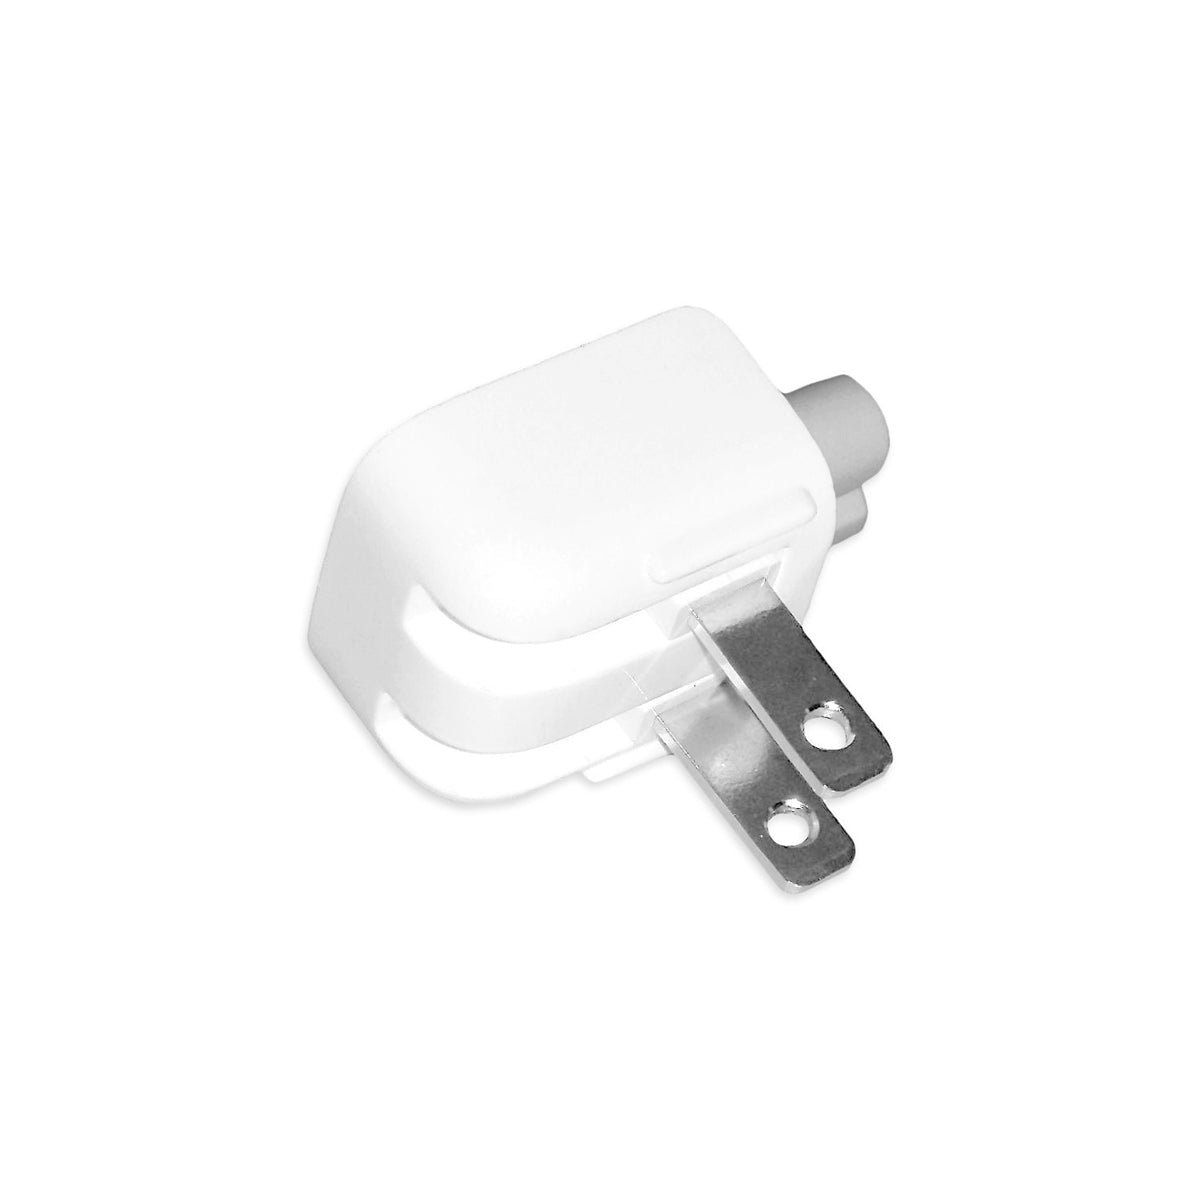 For Apple A1555 iPad Duck Head Adapter Plug 2 Pin 125V-2.5A White-www.firsthelptech.ie